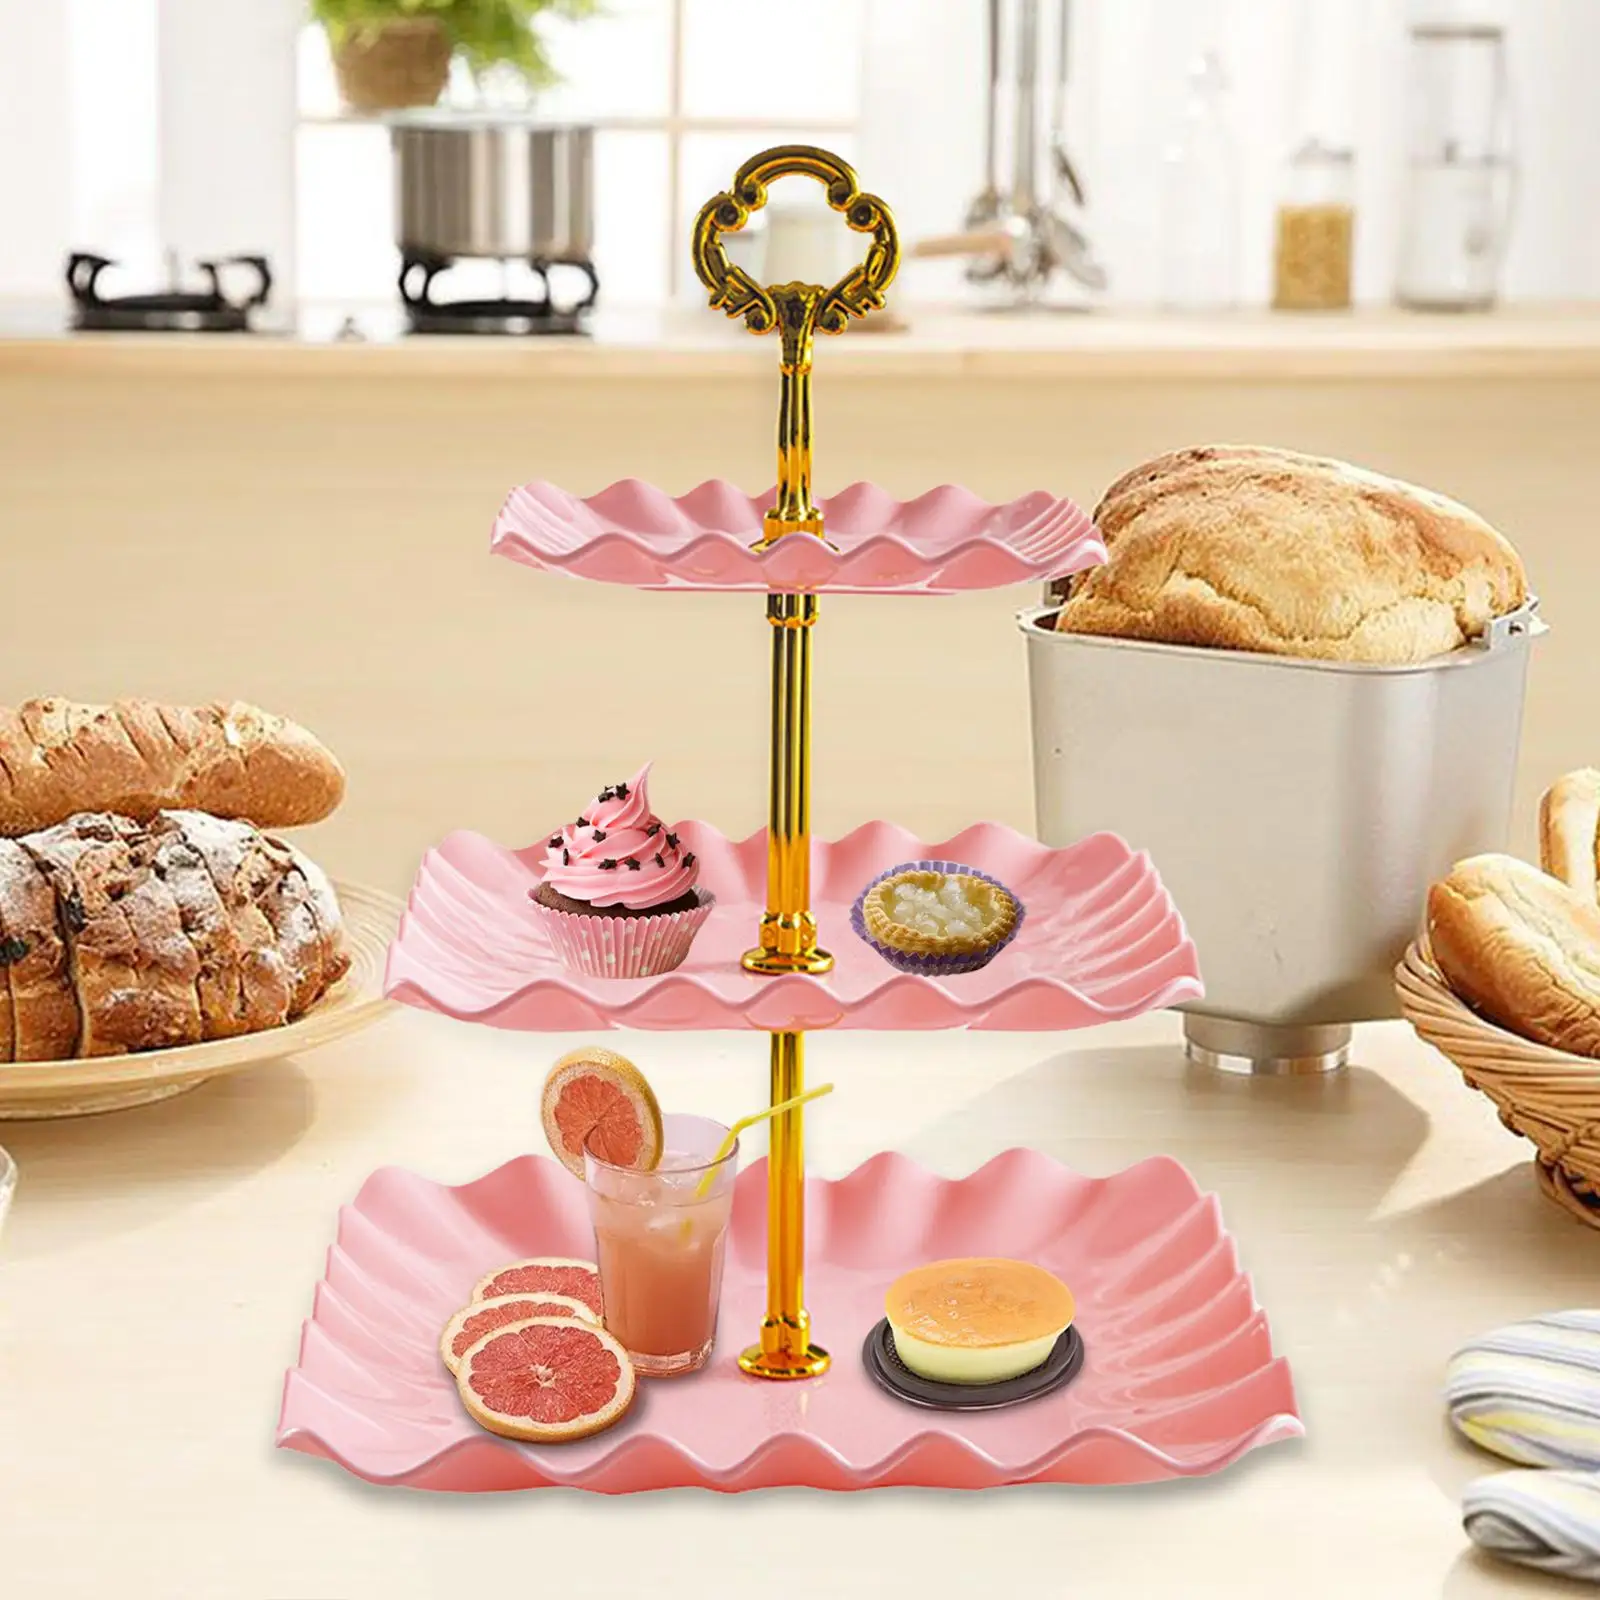 Cupcake Stand 3 Tier Display Plate with Handle Pastry Holder Fruits Snack Serving Tray for Wedding Parties Celebration Birthday